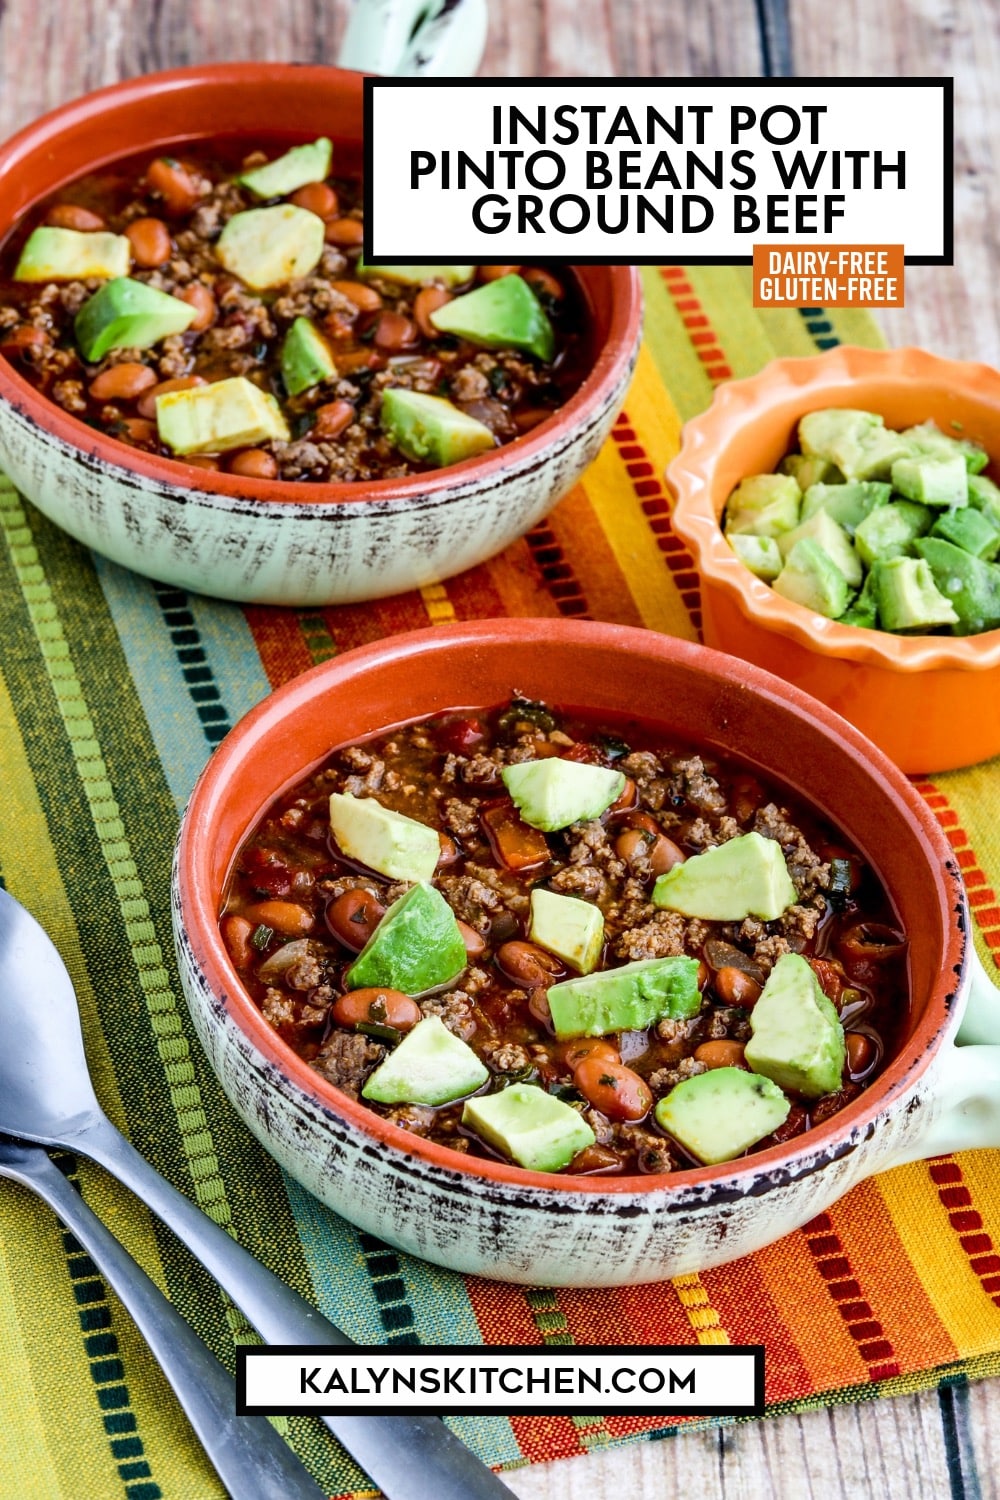 Pinterest image of Instant Pot Pinto Beans with Ground Beef